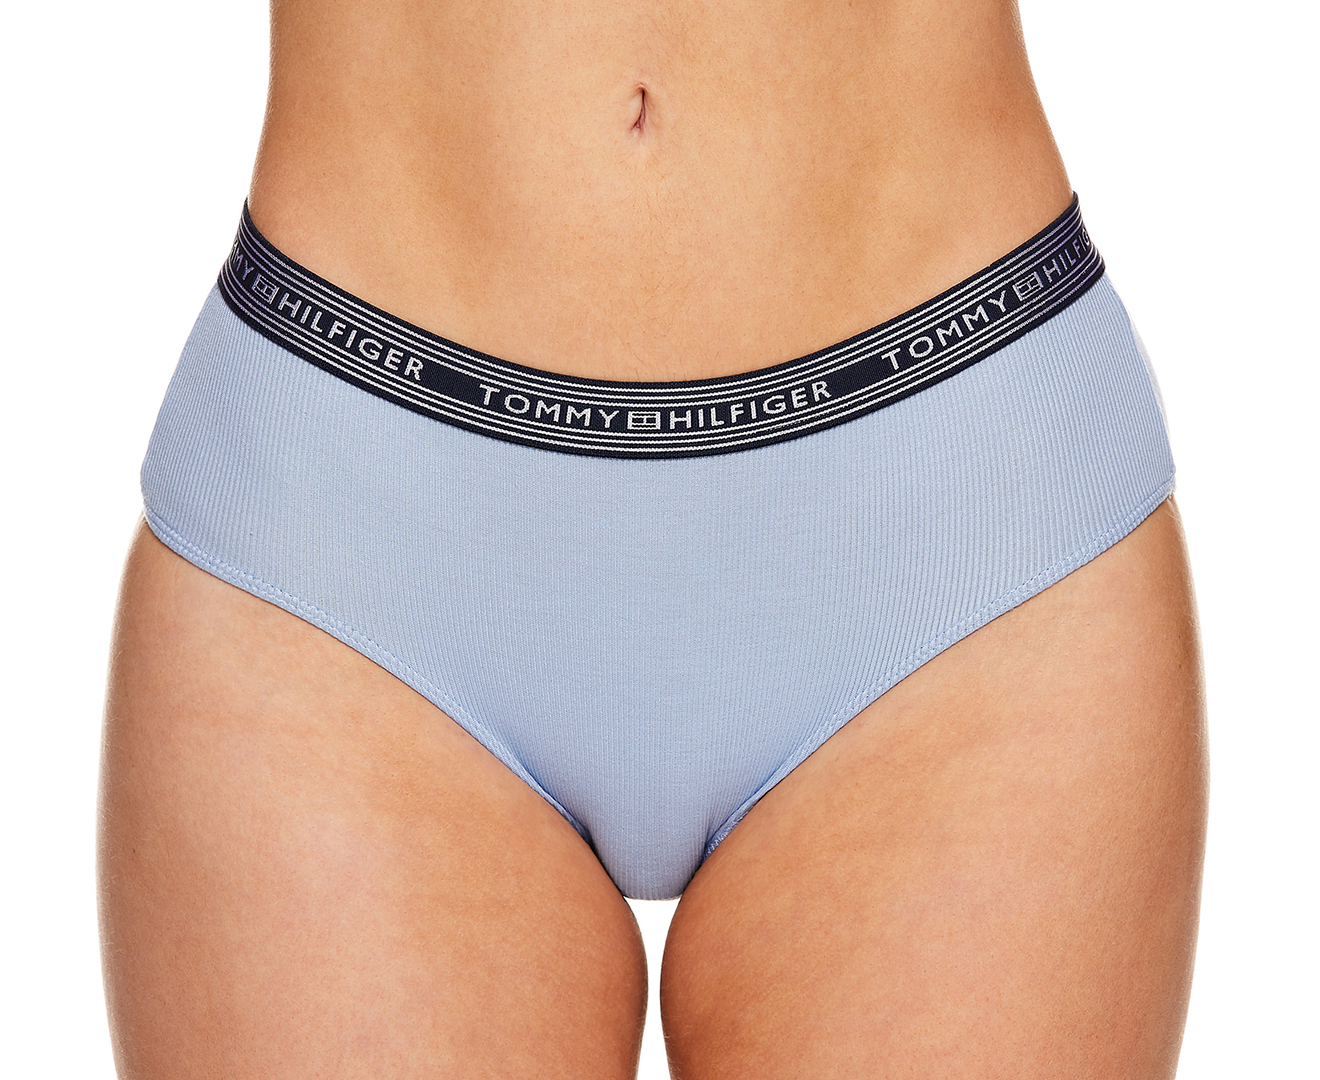 Tommy Hilfiger Women's Hipster-Cut Classic Cotton Underwear Panty, 5 Pack